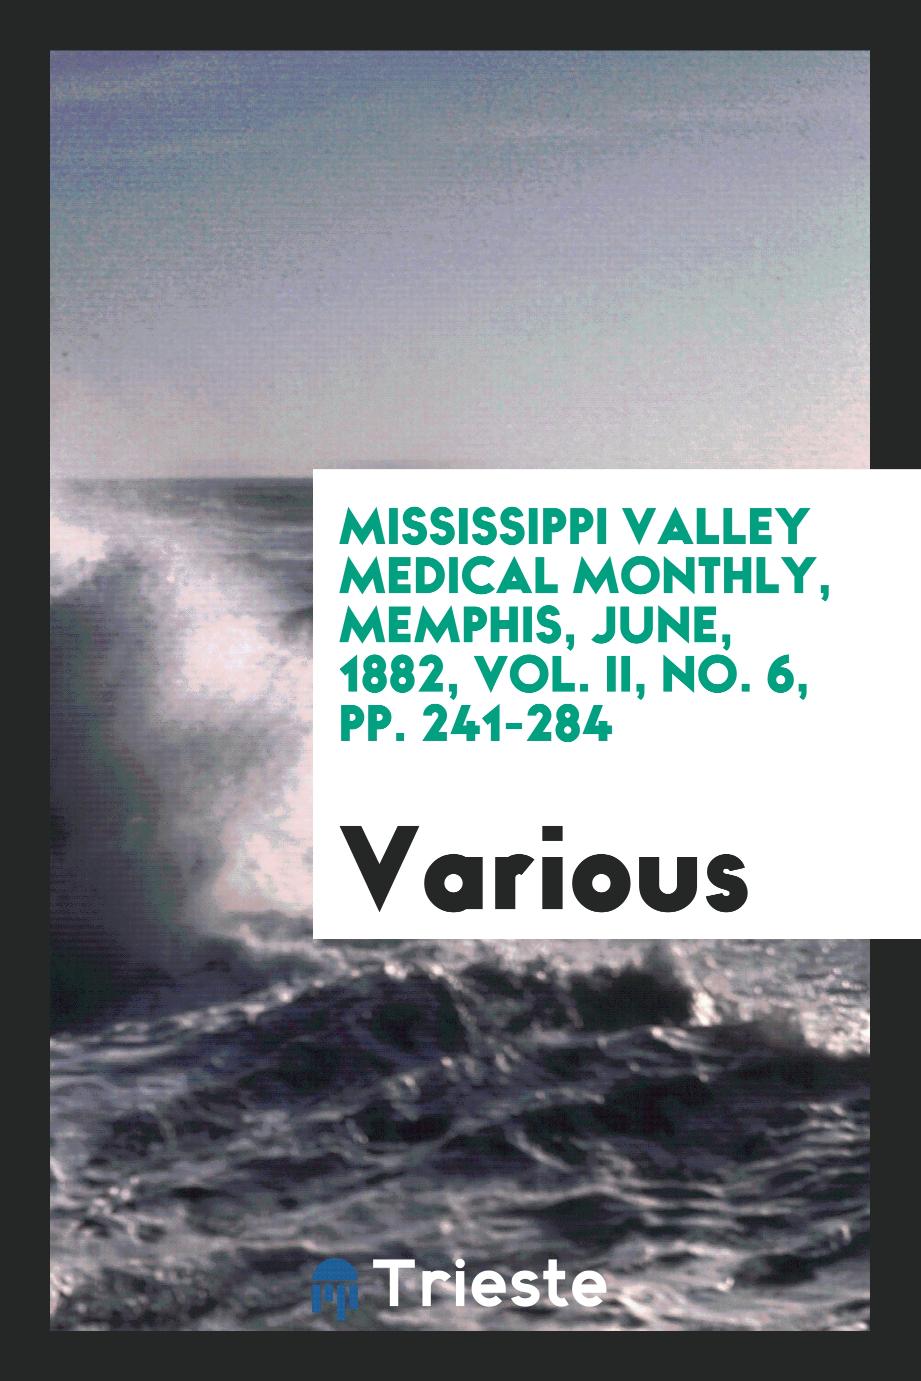 Mississippi valley Medical Monthly, Memphis, June, 1882, Vol. II, No. 6, pp. 241-284